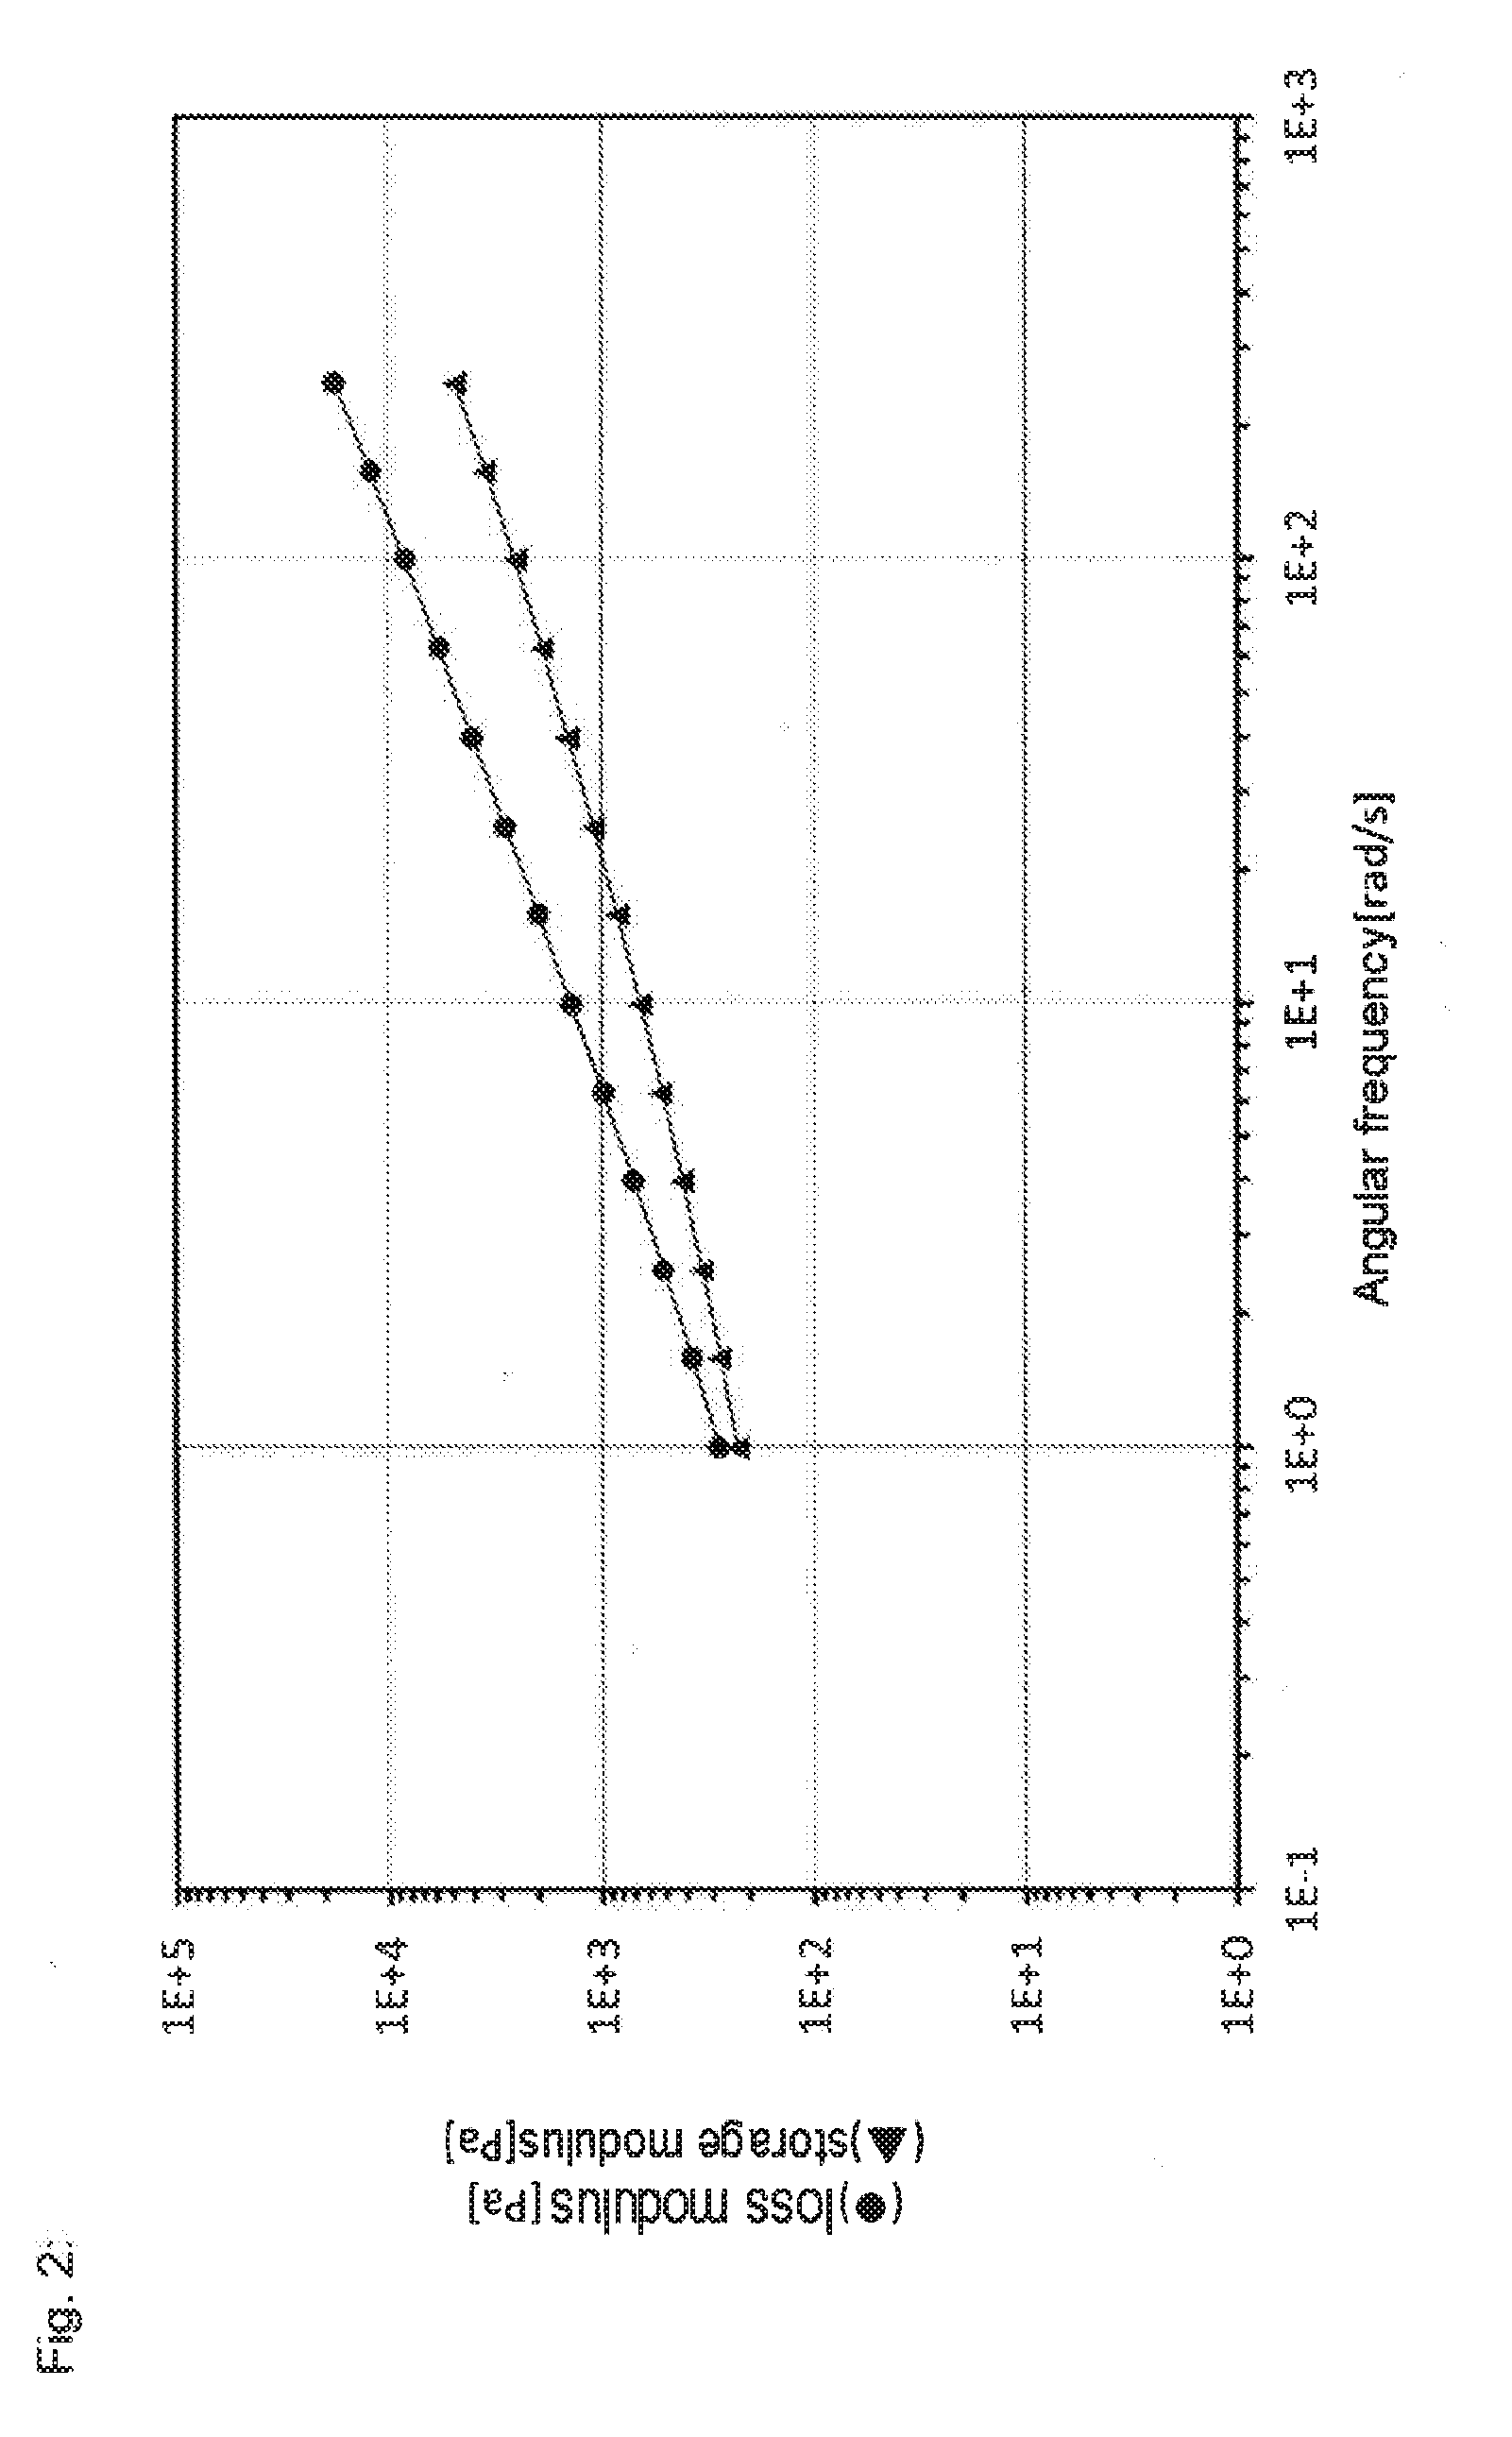 Gel-like polymer composition obtained by polymerising a monomer containing acid groups in the presence of a polyether compound